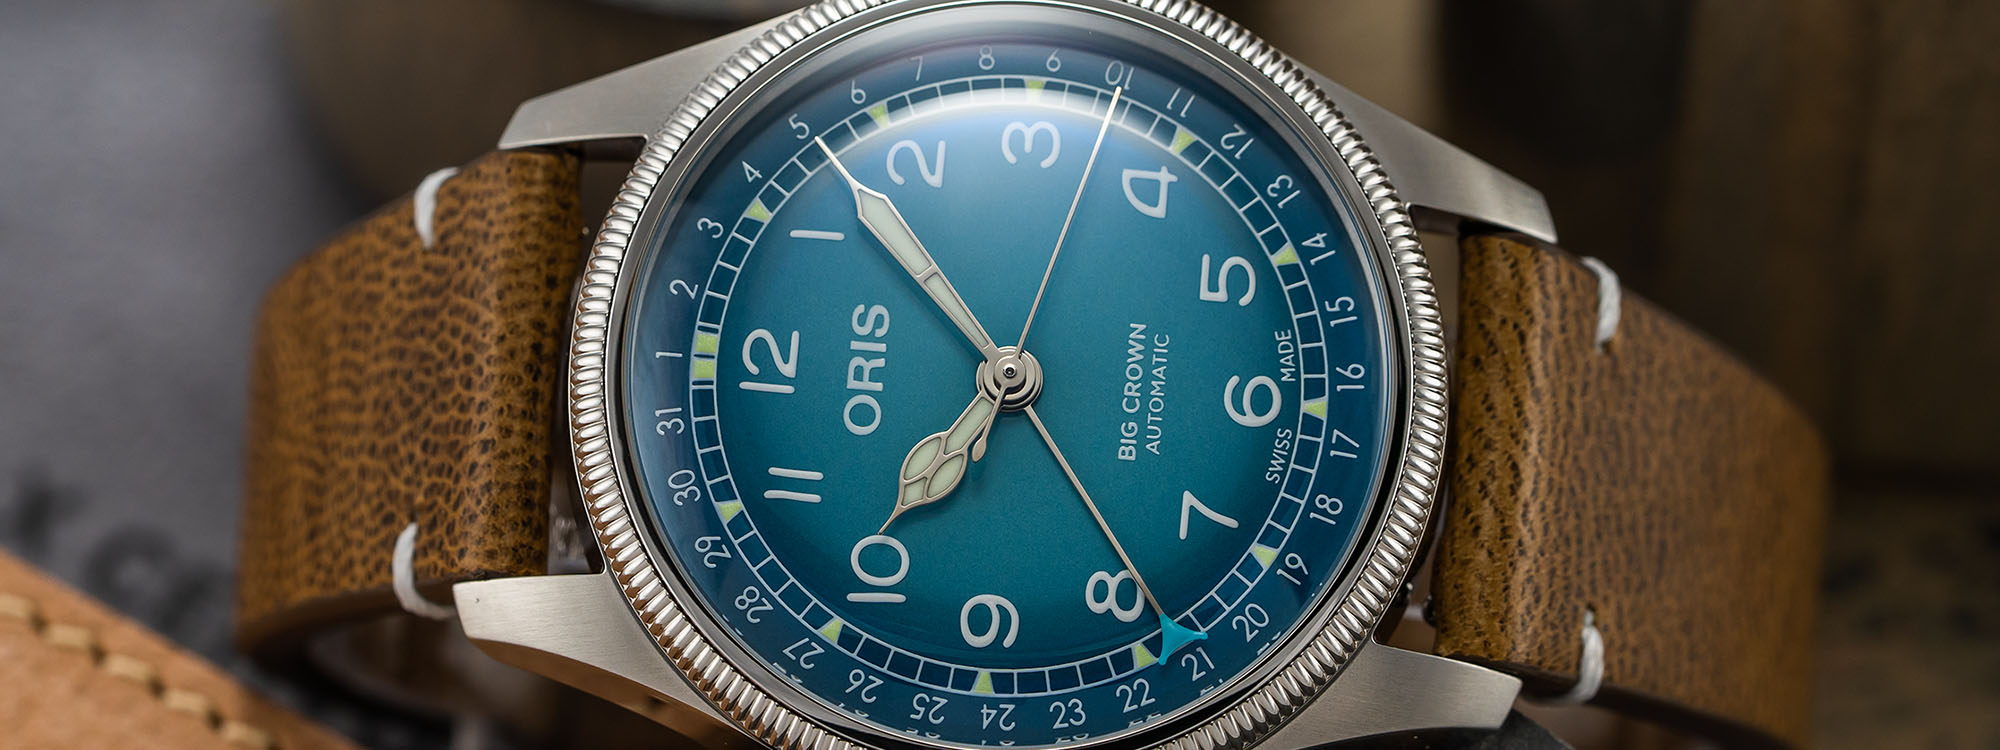 Oris Watches Review: The Independent Brand's History and Modern Milestones